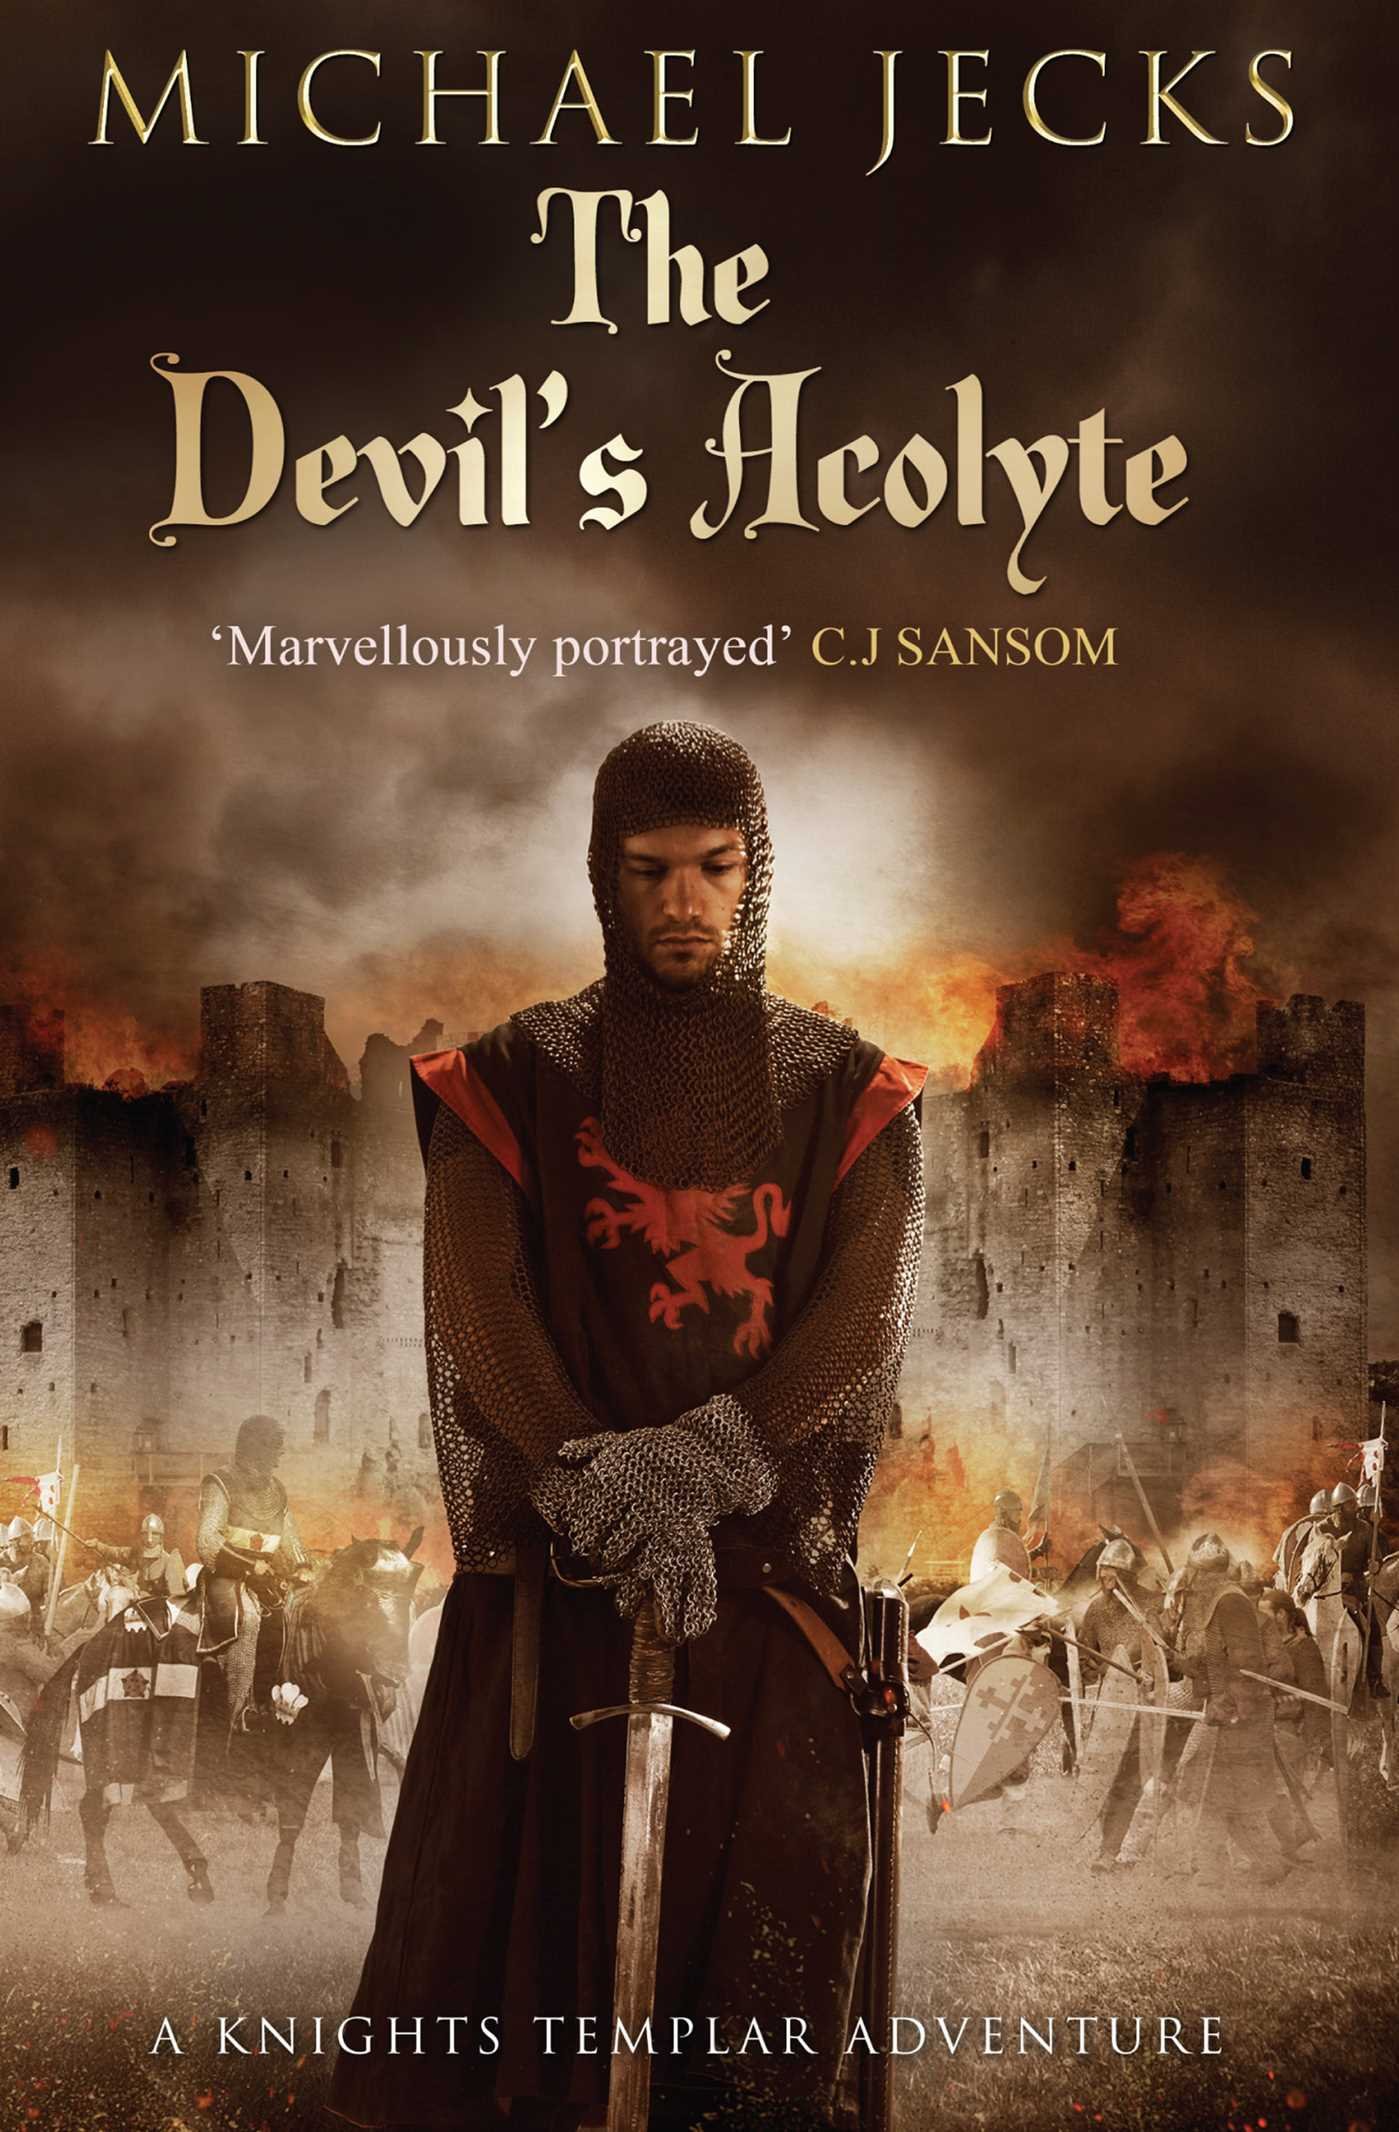 The Devil's Acolyte